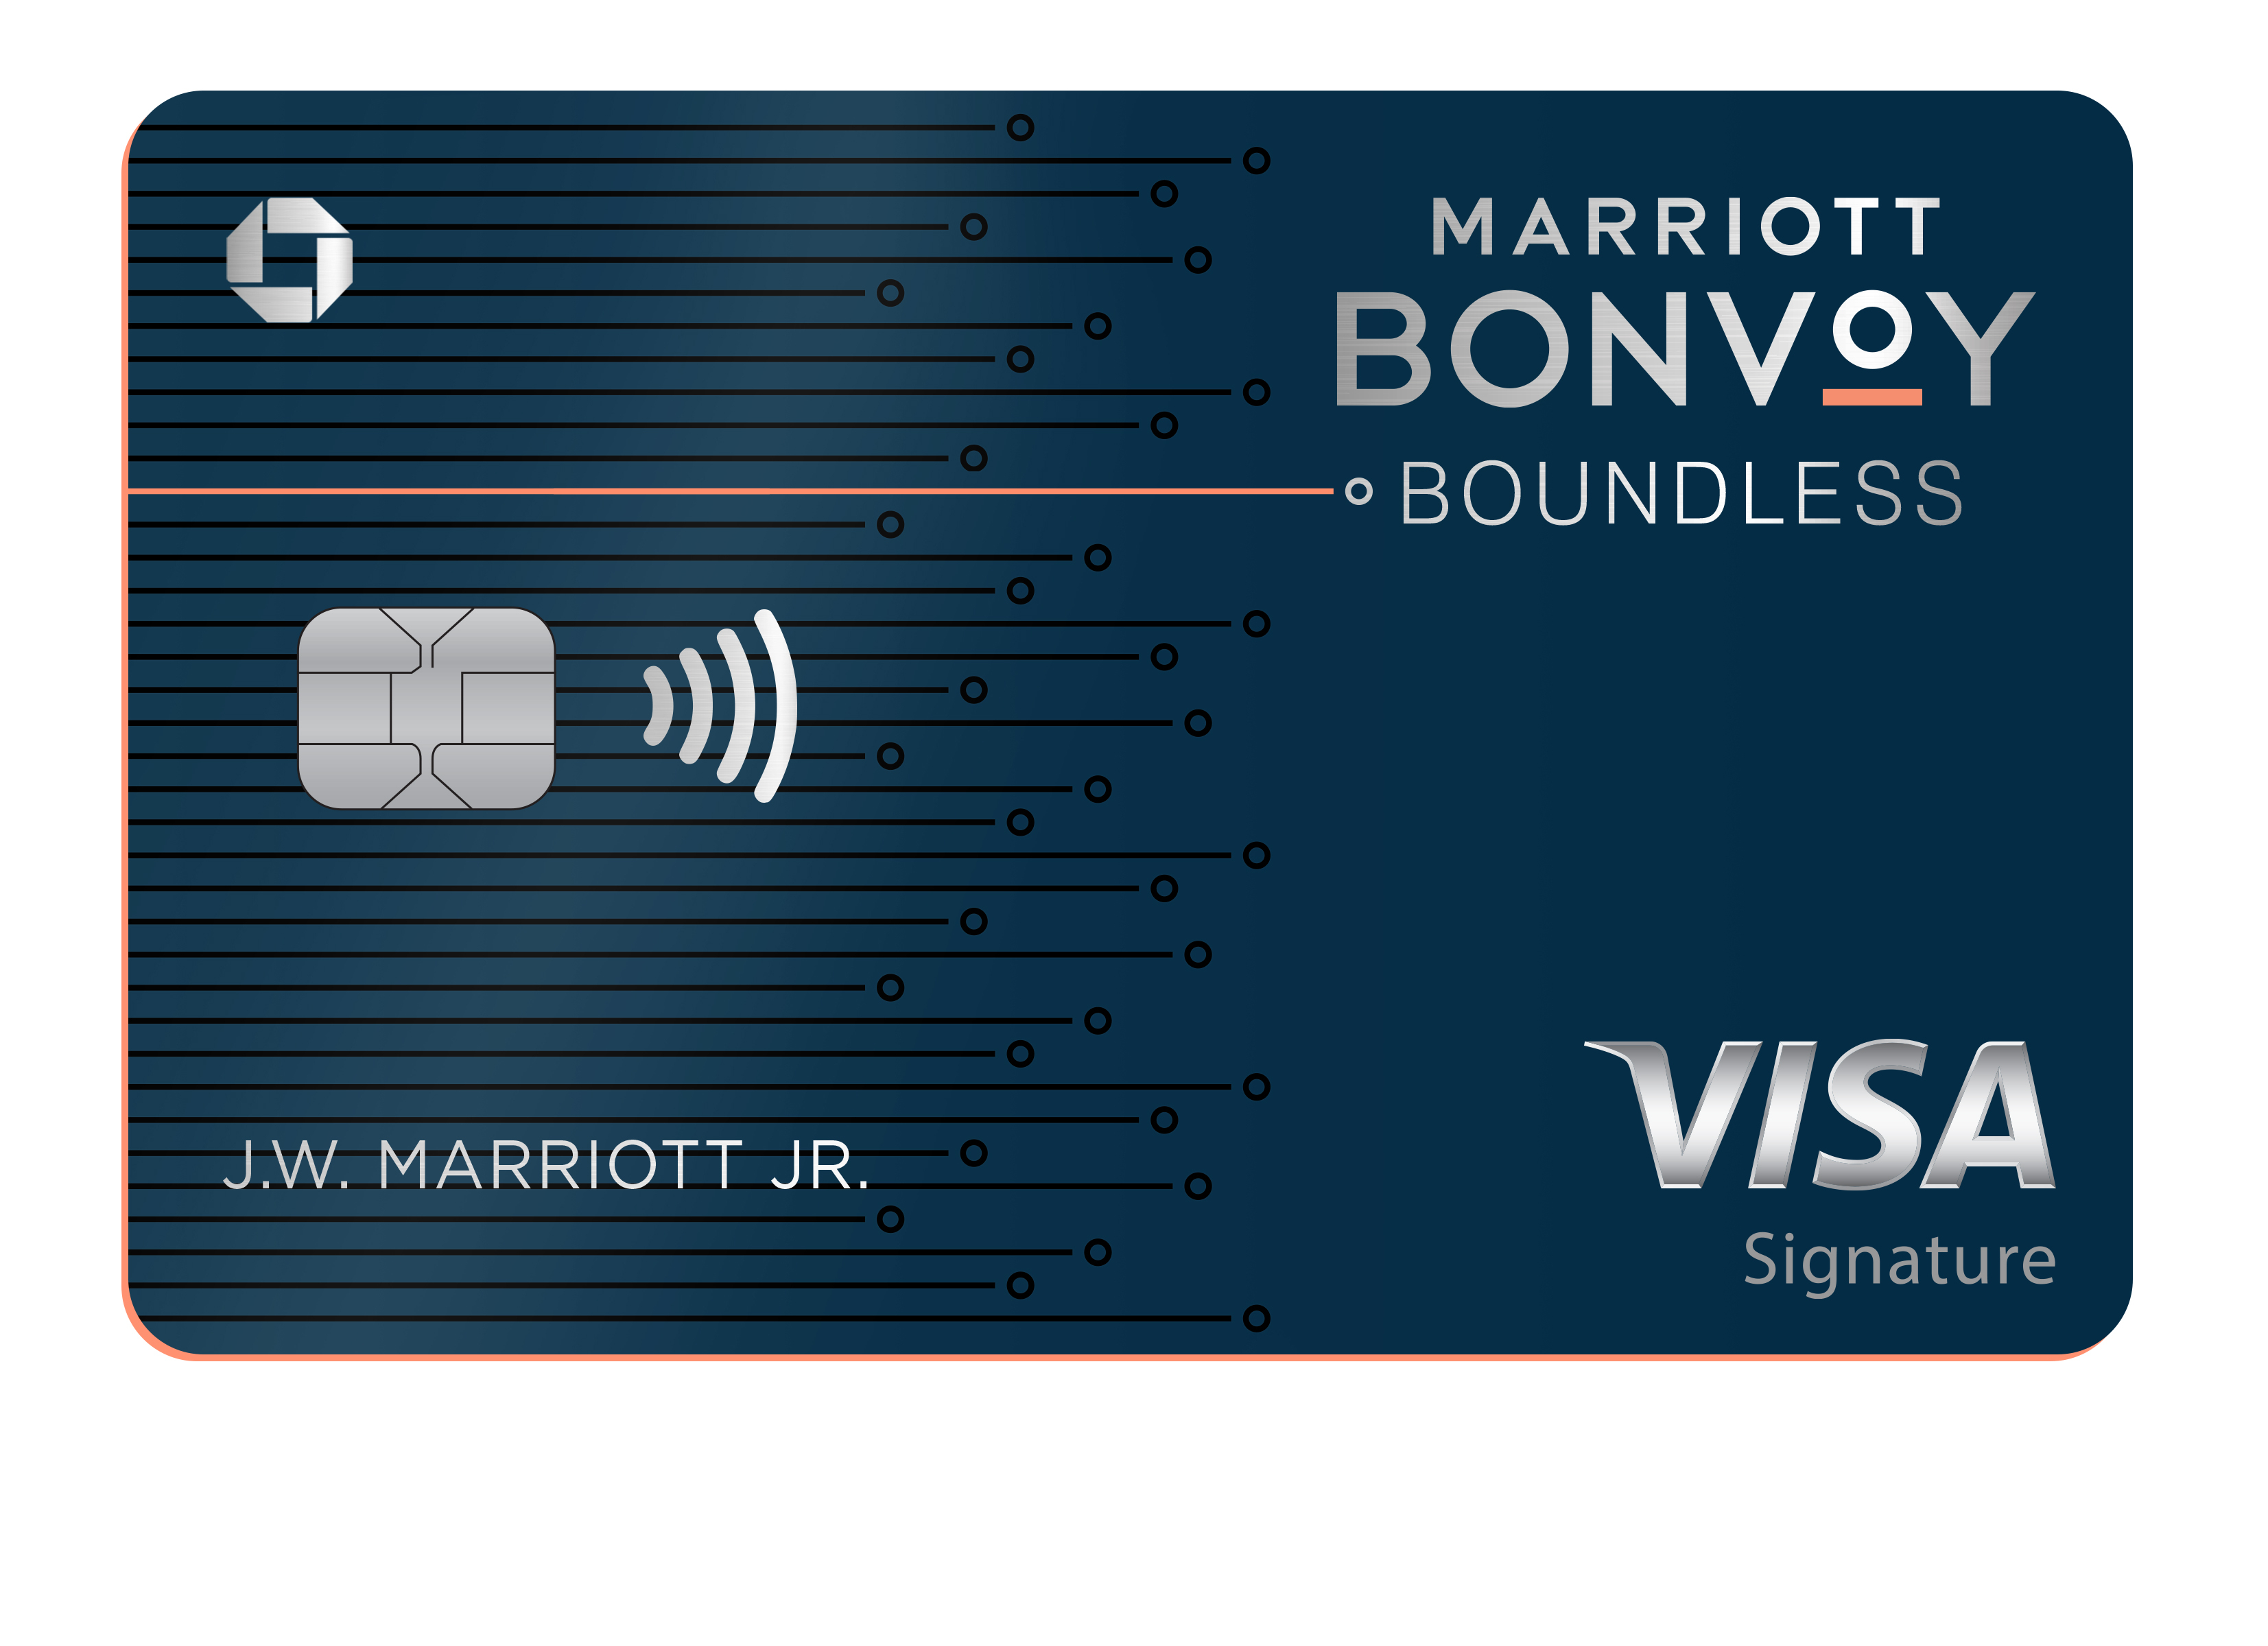 Chase and Marriott Bonvoy® Announce Enhanced Benefits to Marriott